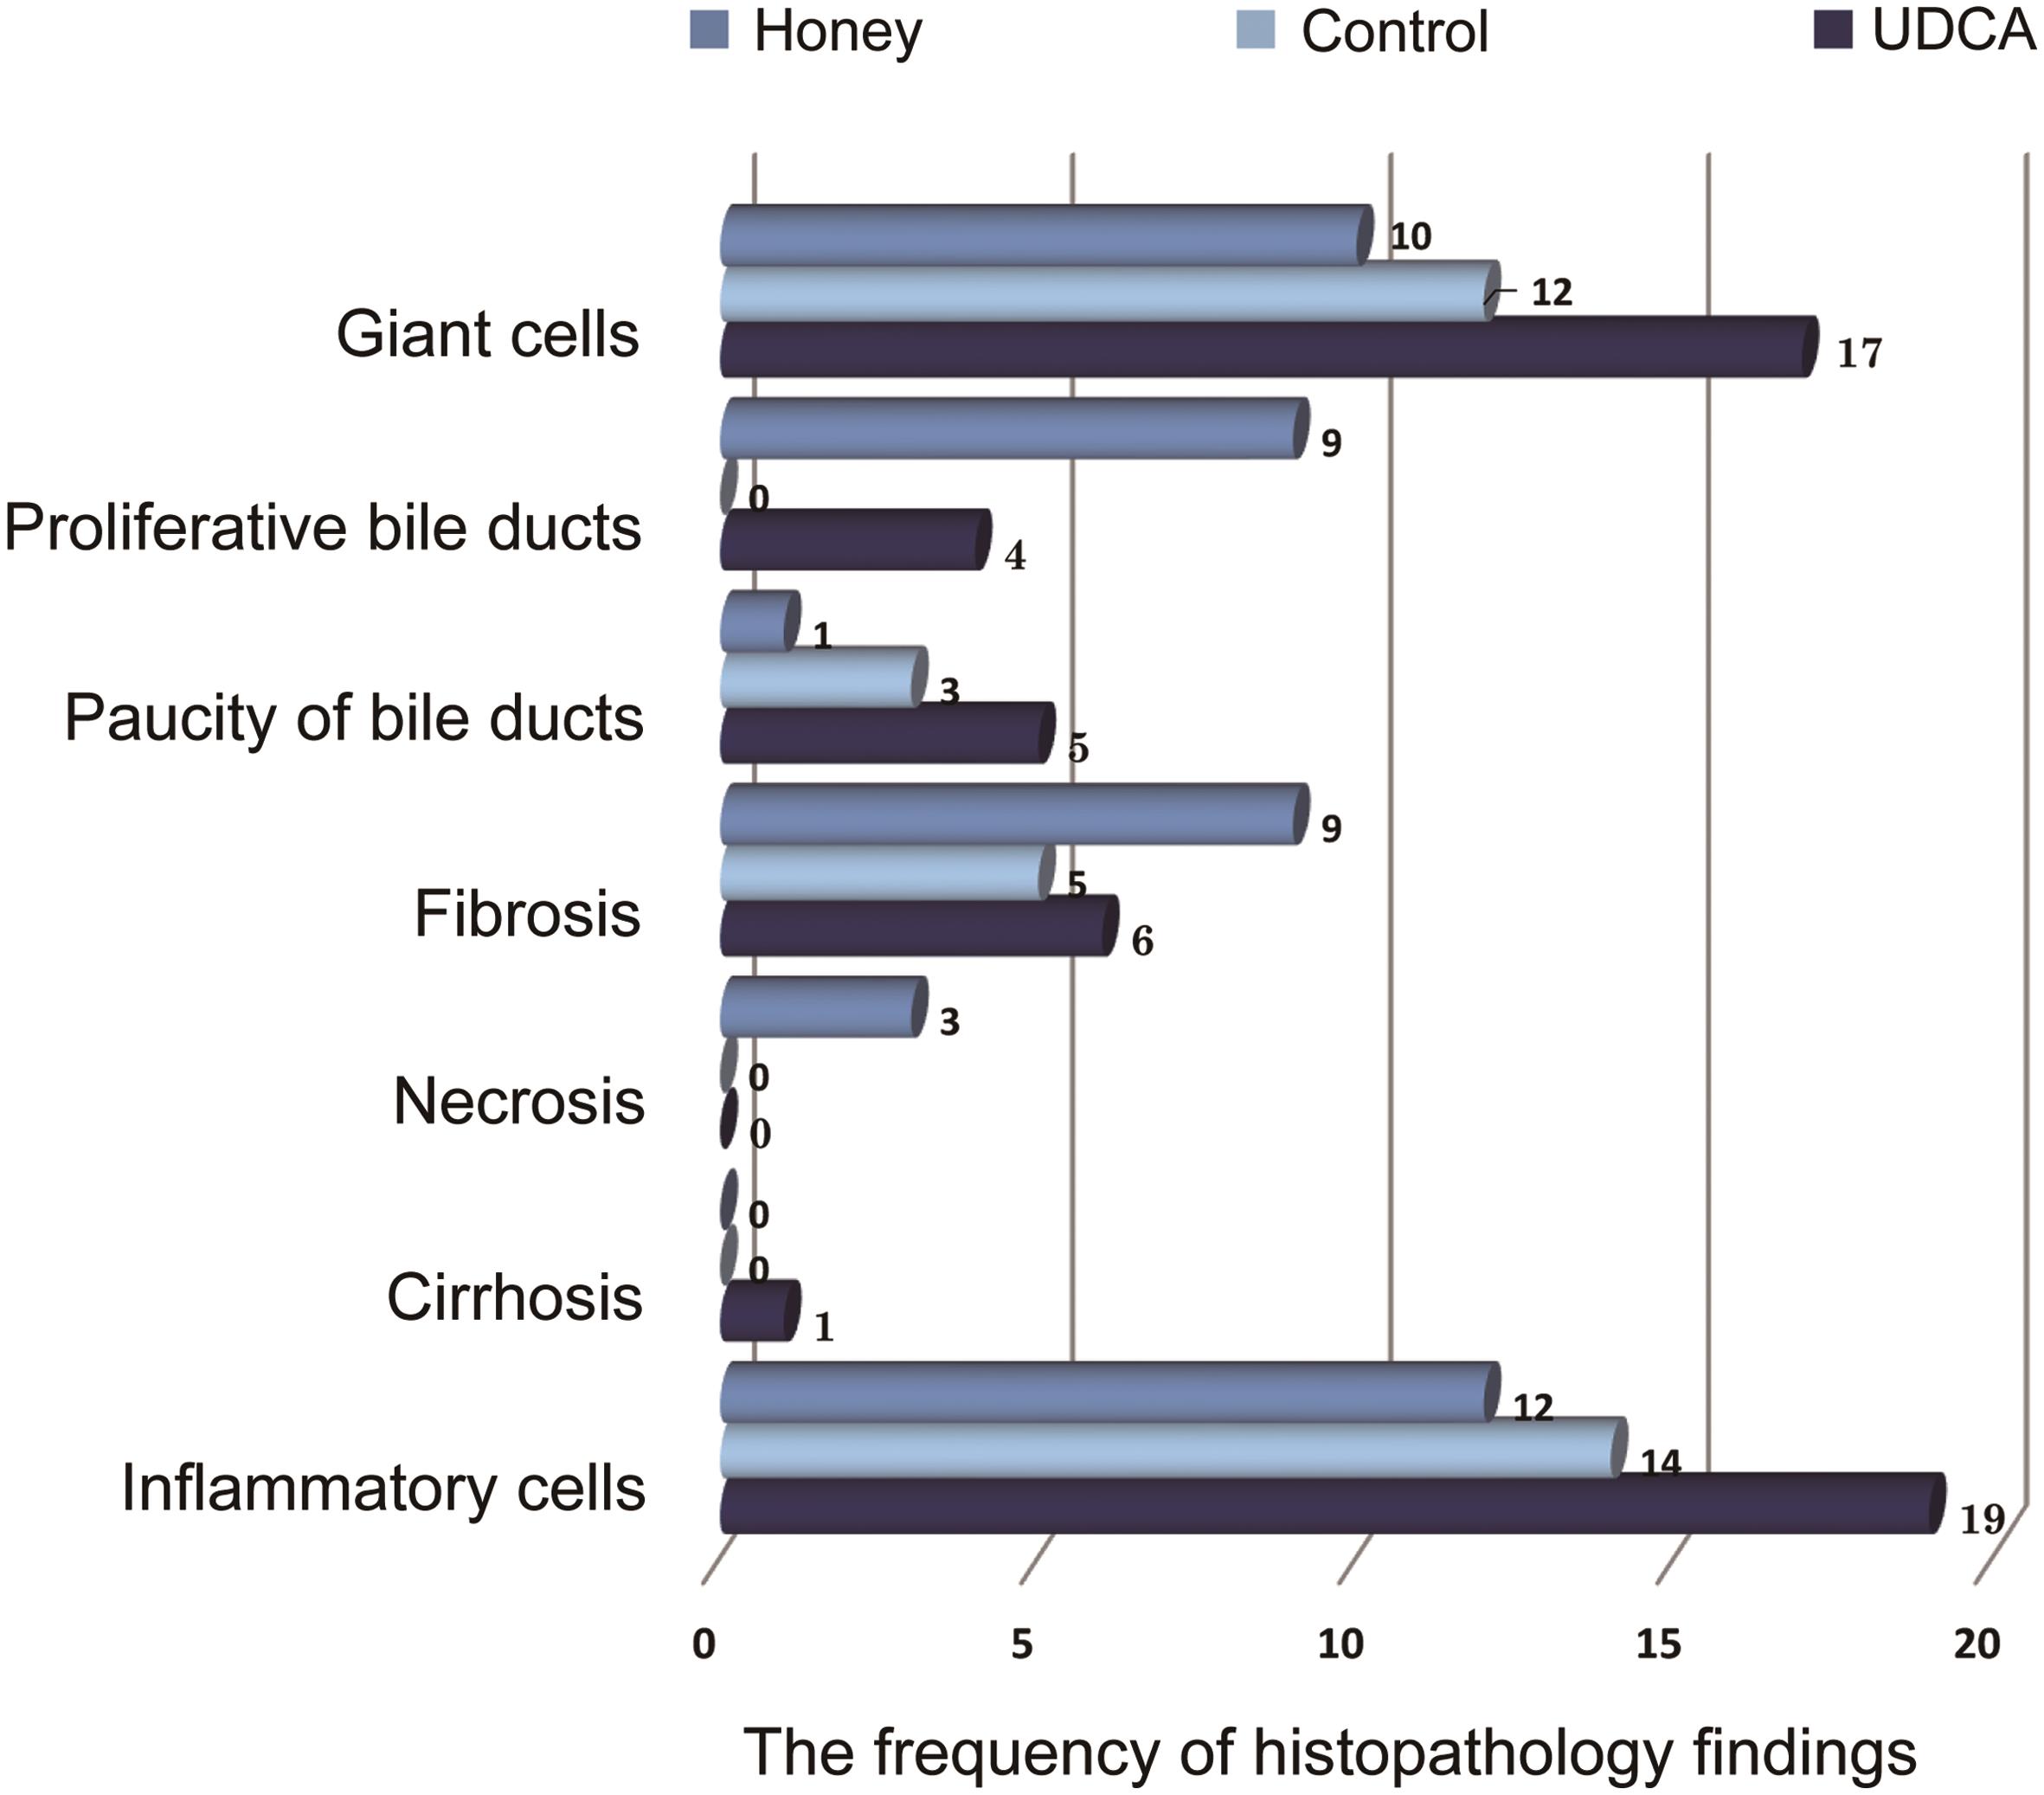 Liver biopsy findings among the studied groups.